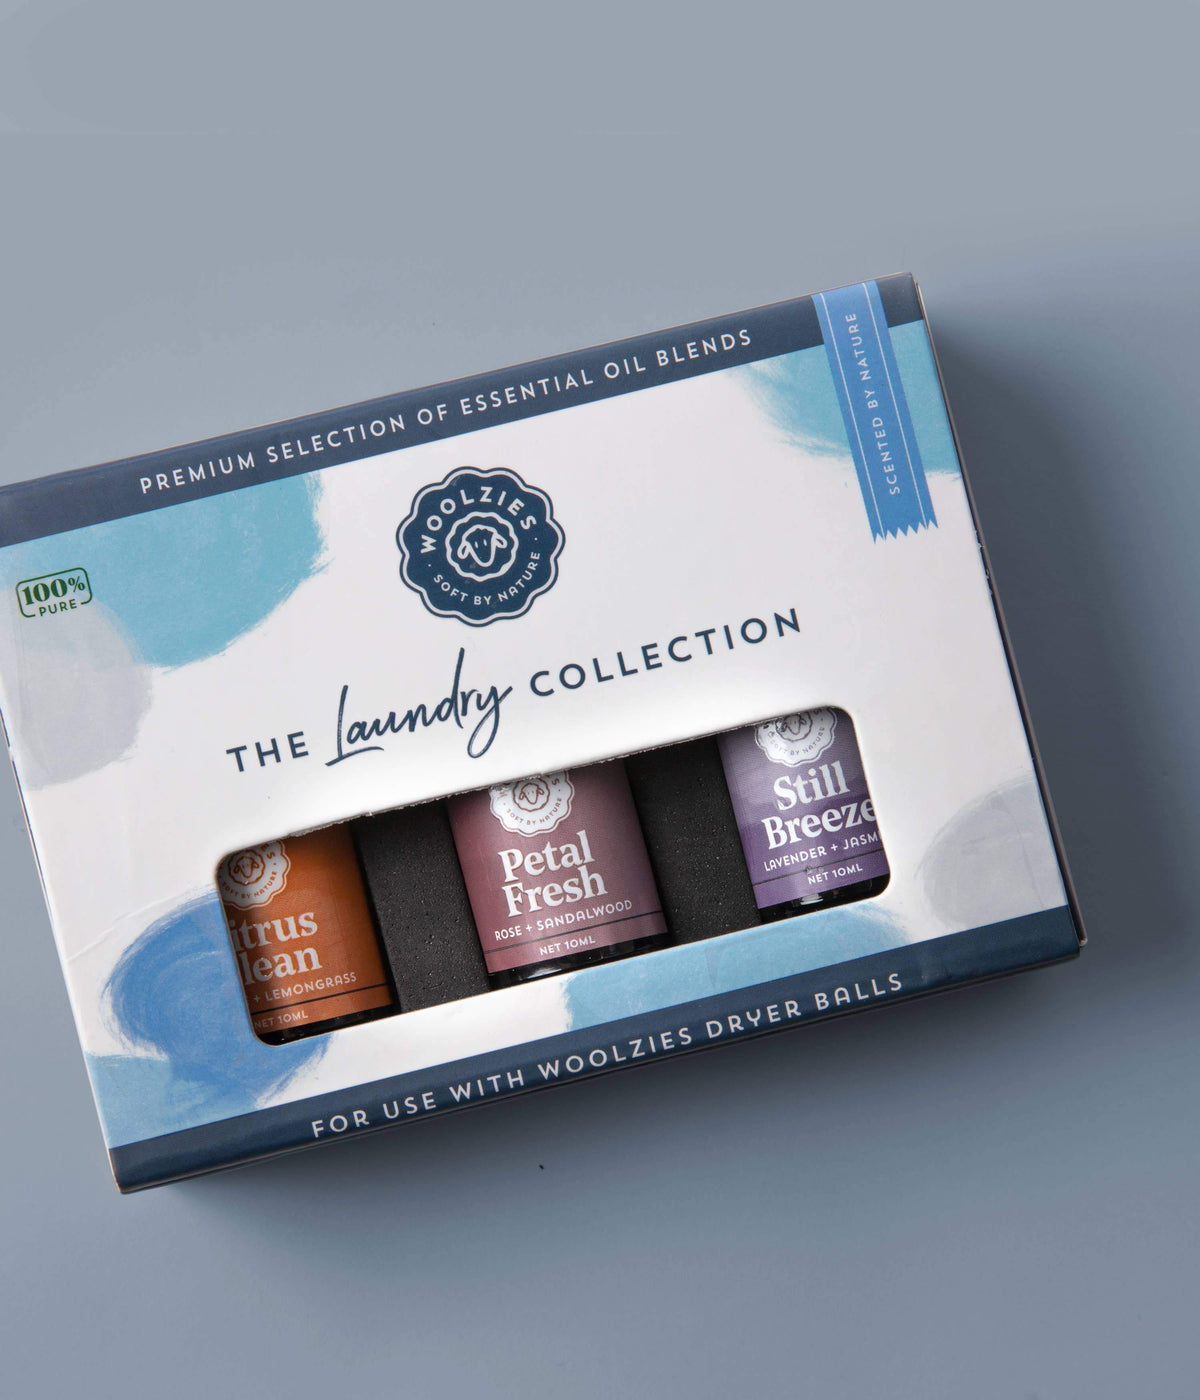 Woolzies The Laundry Essential Oil Collection